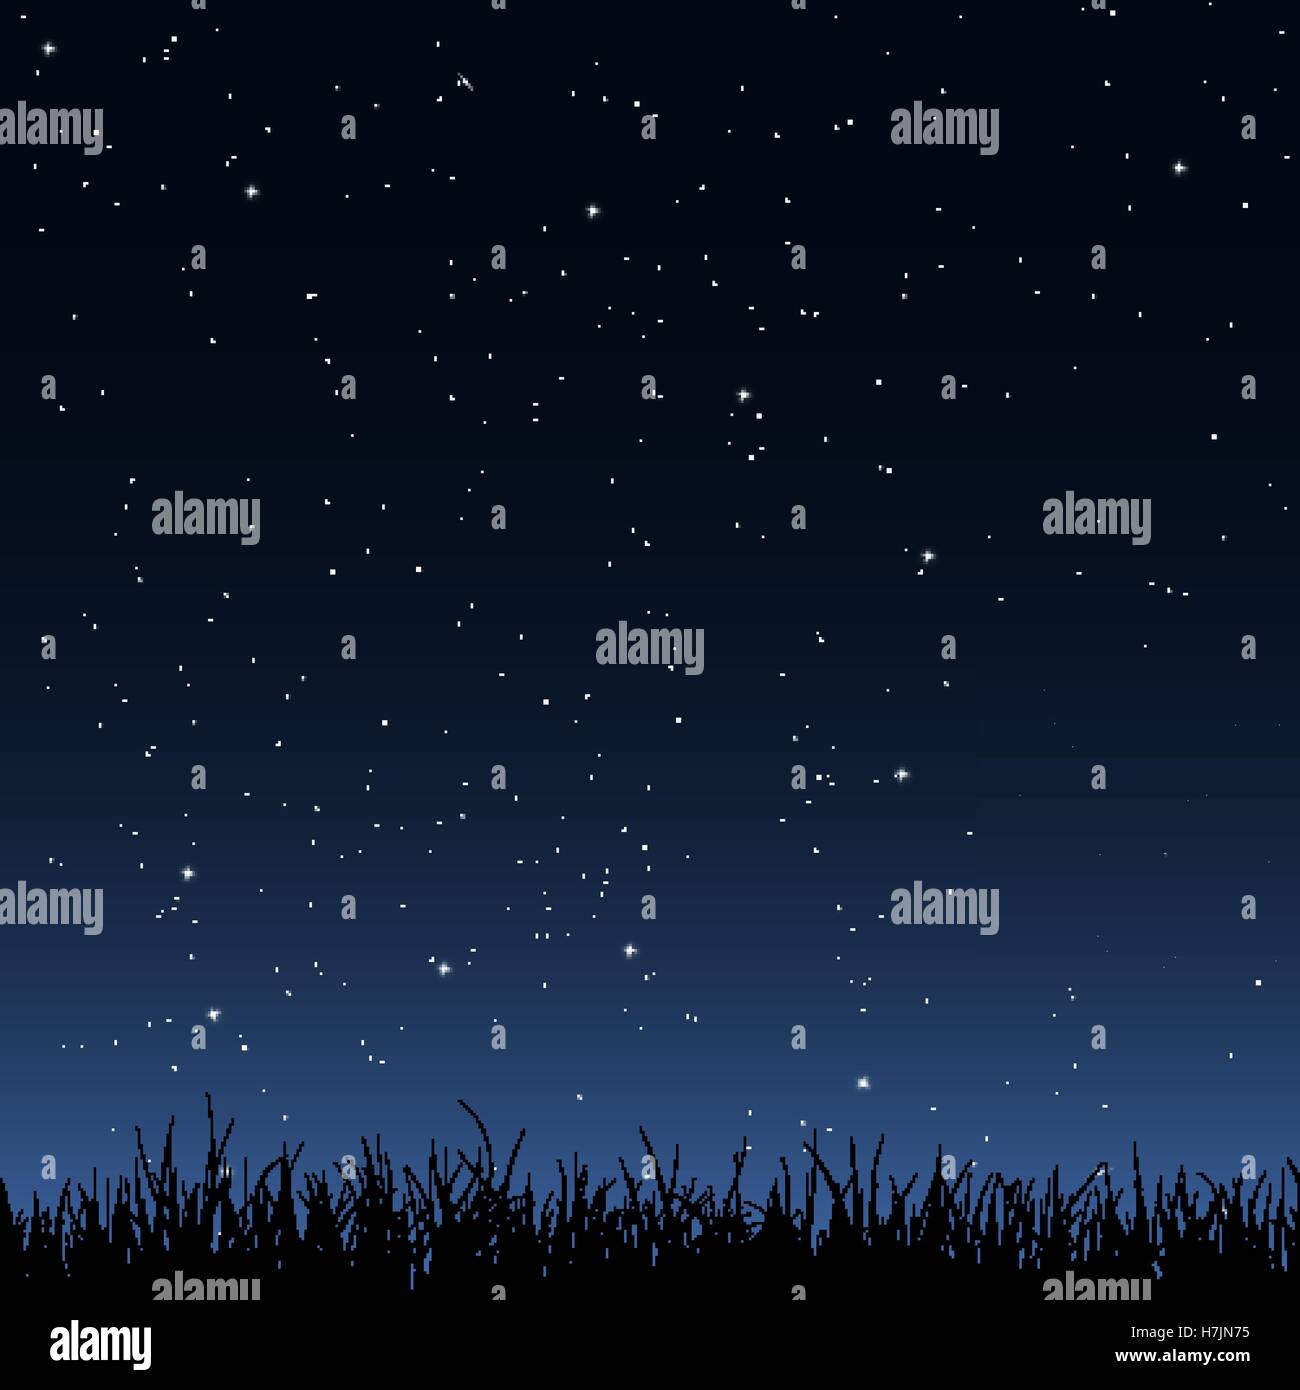 Horizontal seamless vector image. Black silhouette of grass under the night sky with a lot of stars and galaxies. Stock Vector